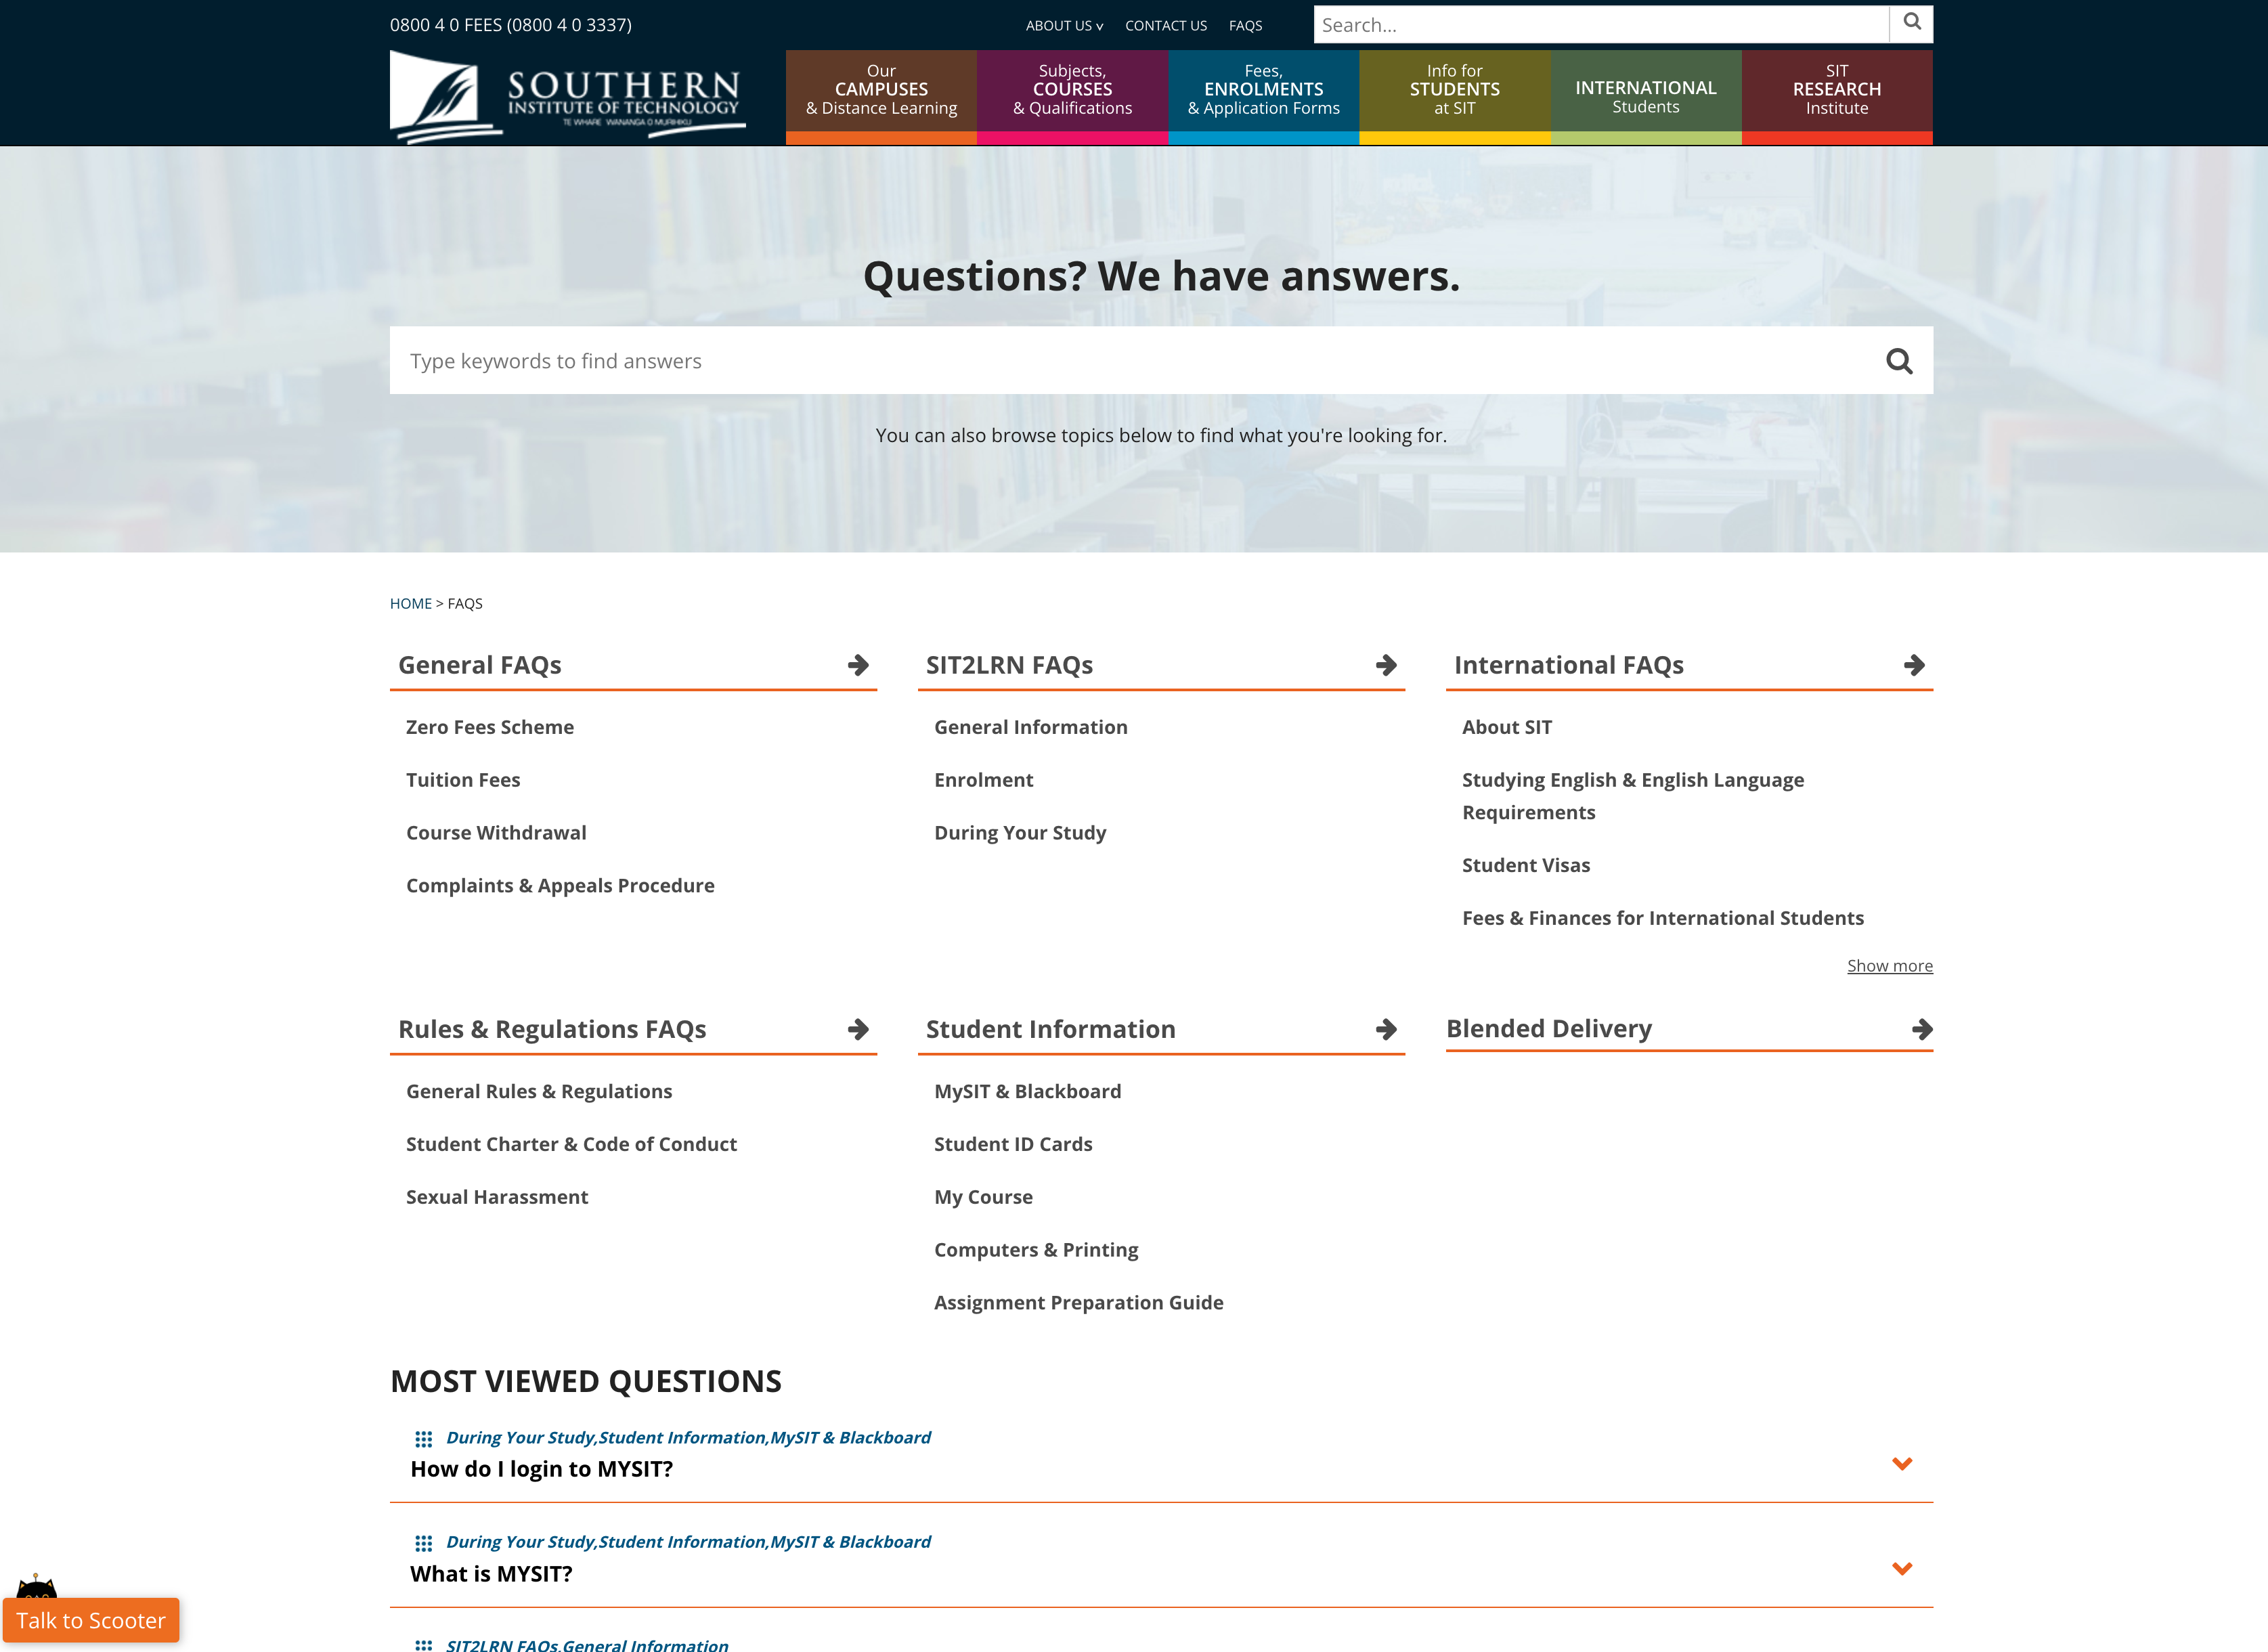 Southern Institute FAQ Page